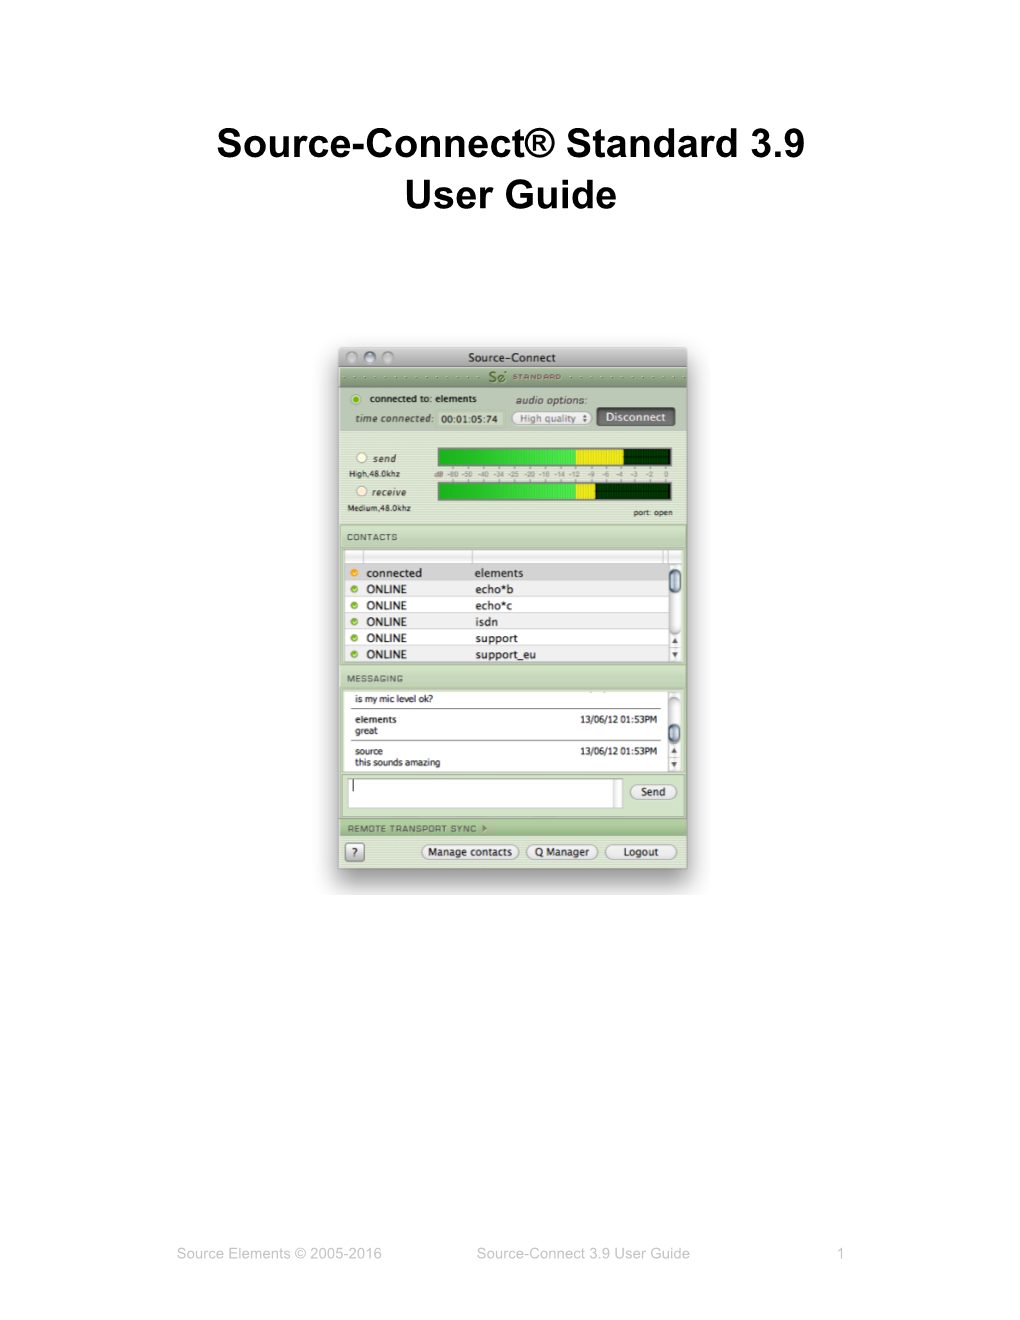 Source-Connect® Standard 3.9 User Guide